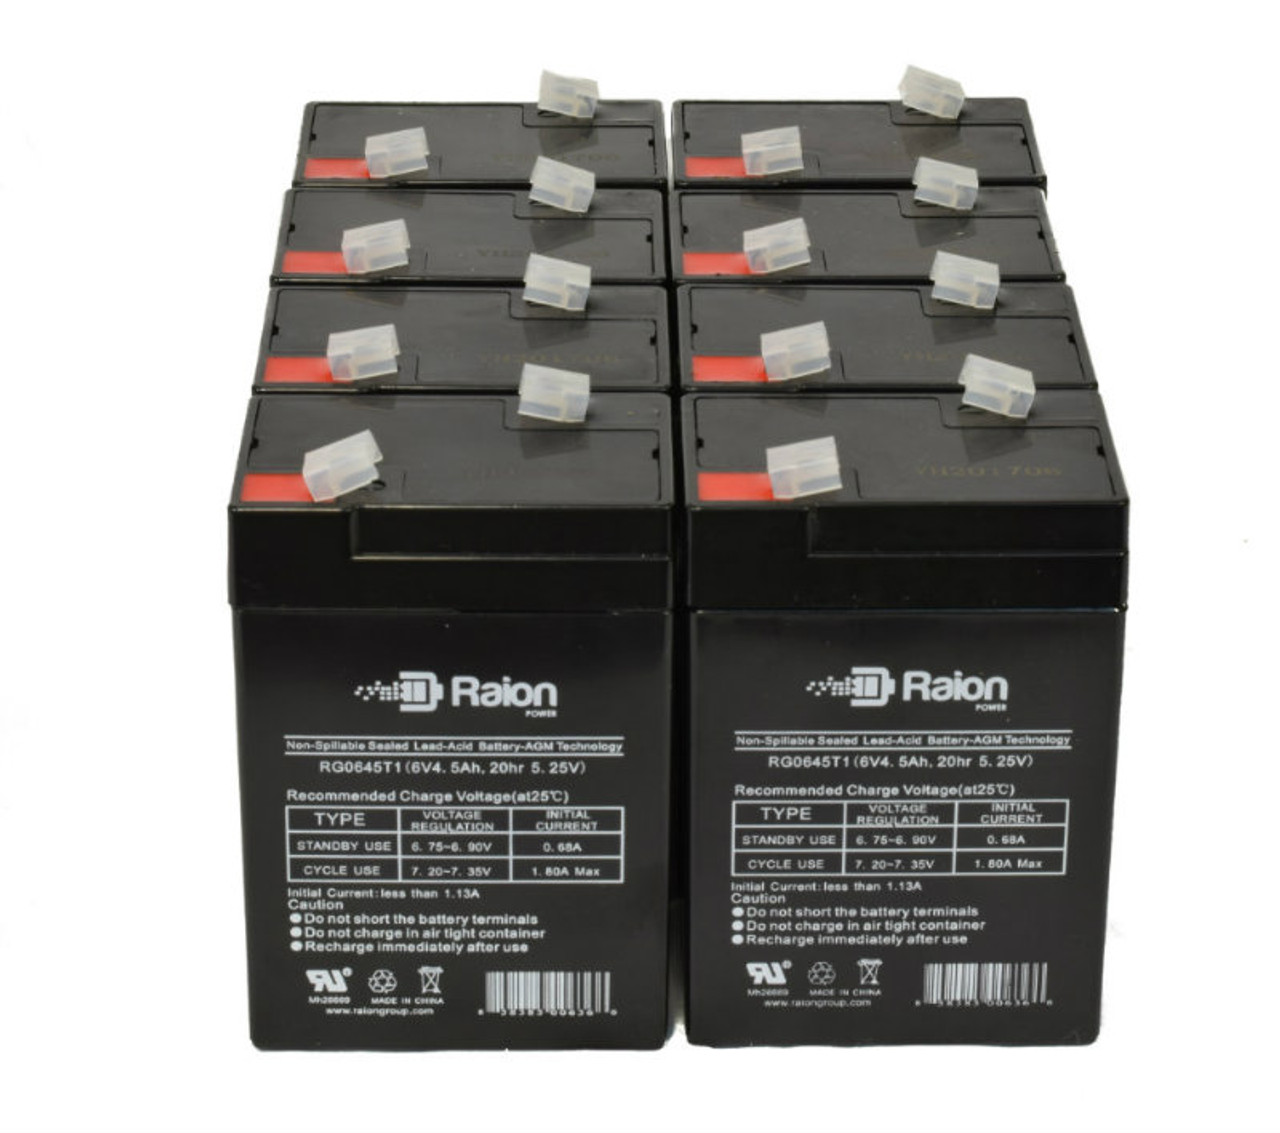 Raion Power 6V 4.5Ah Replacement Emergency Light Battery for Lithonia XSXPEL - 8 Pack